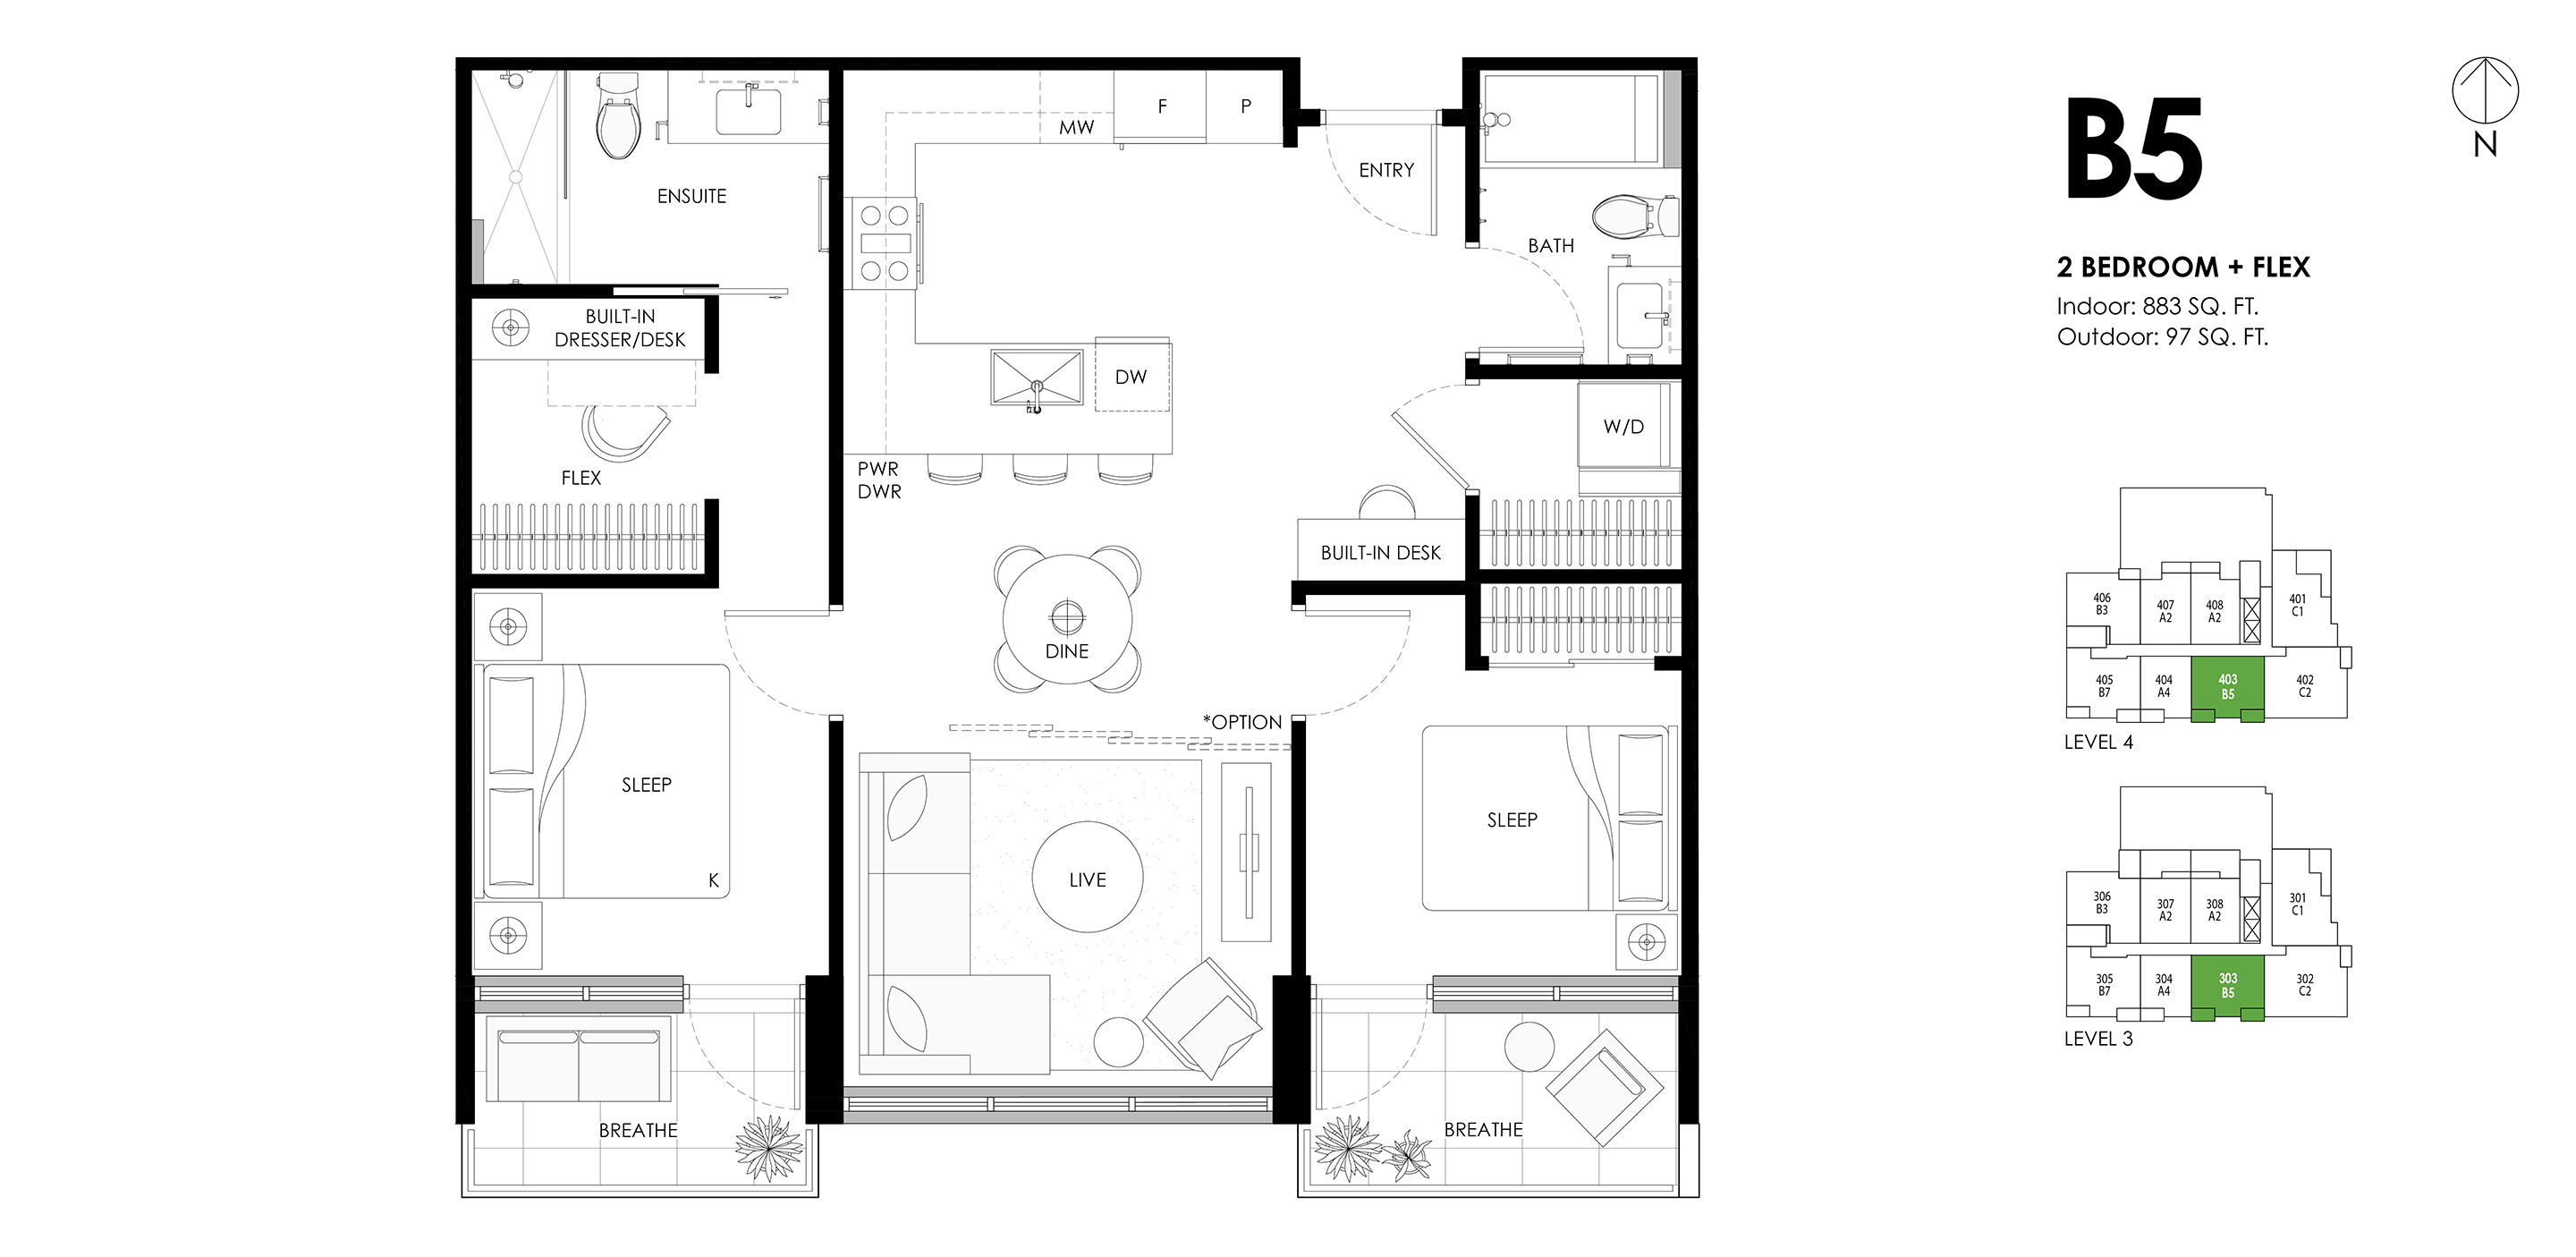 B5 Floor Plan of Ava Condos with undefined beds